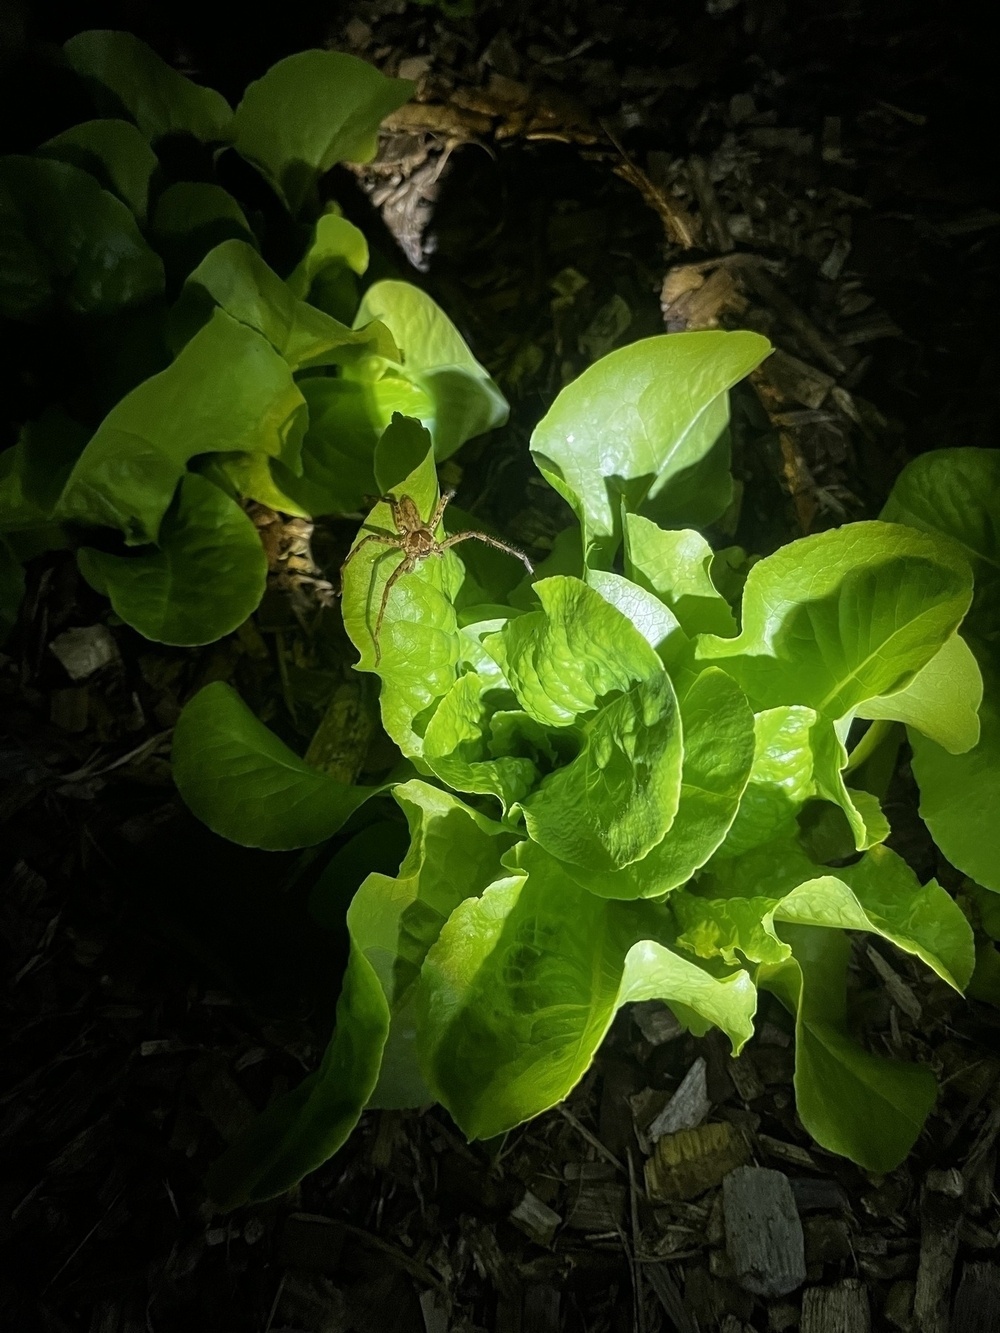 A largish spider is perched on a lettuce plant illuminated by a flashlight, or torch, in a dark setting.